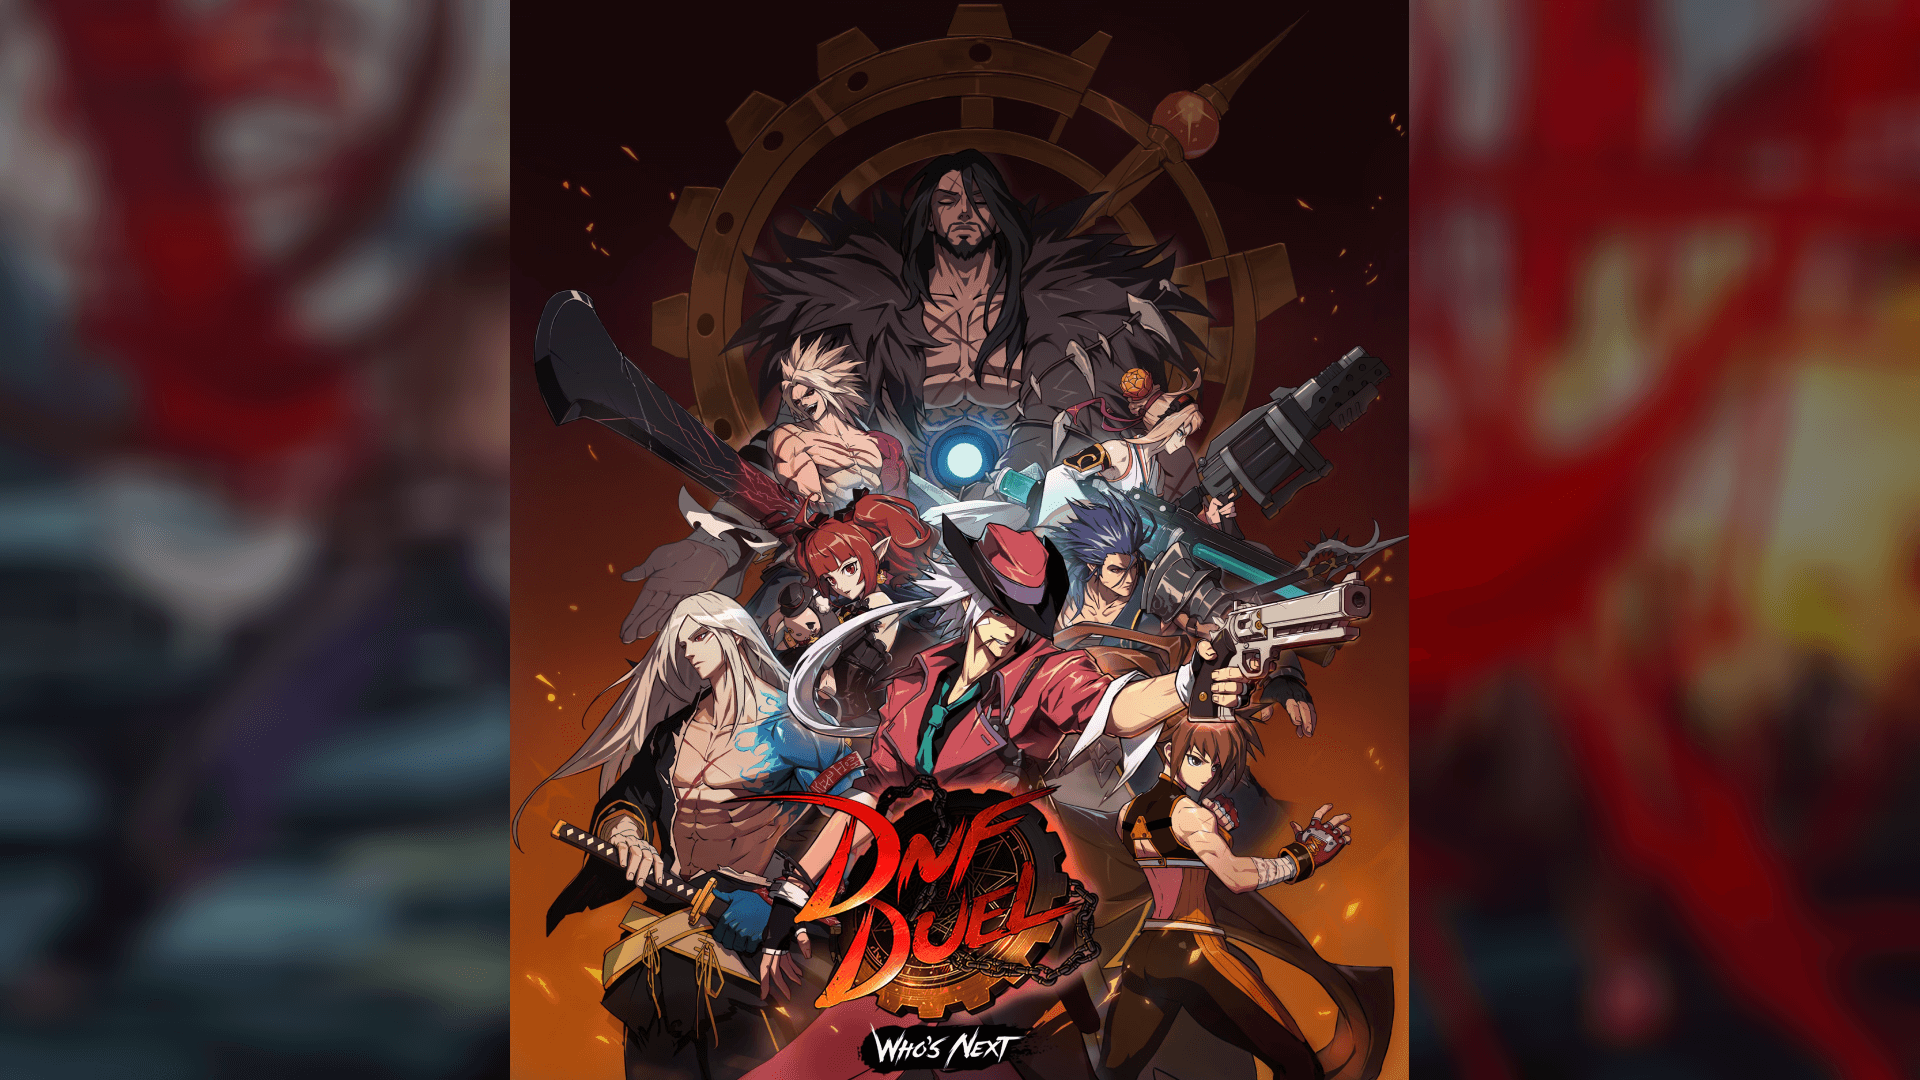 Pre-Orders for DNF Duel are Open